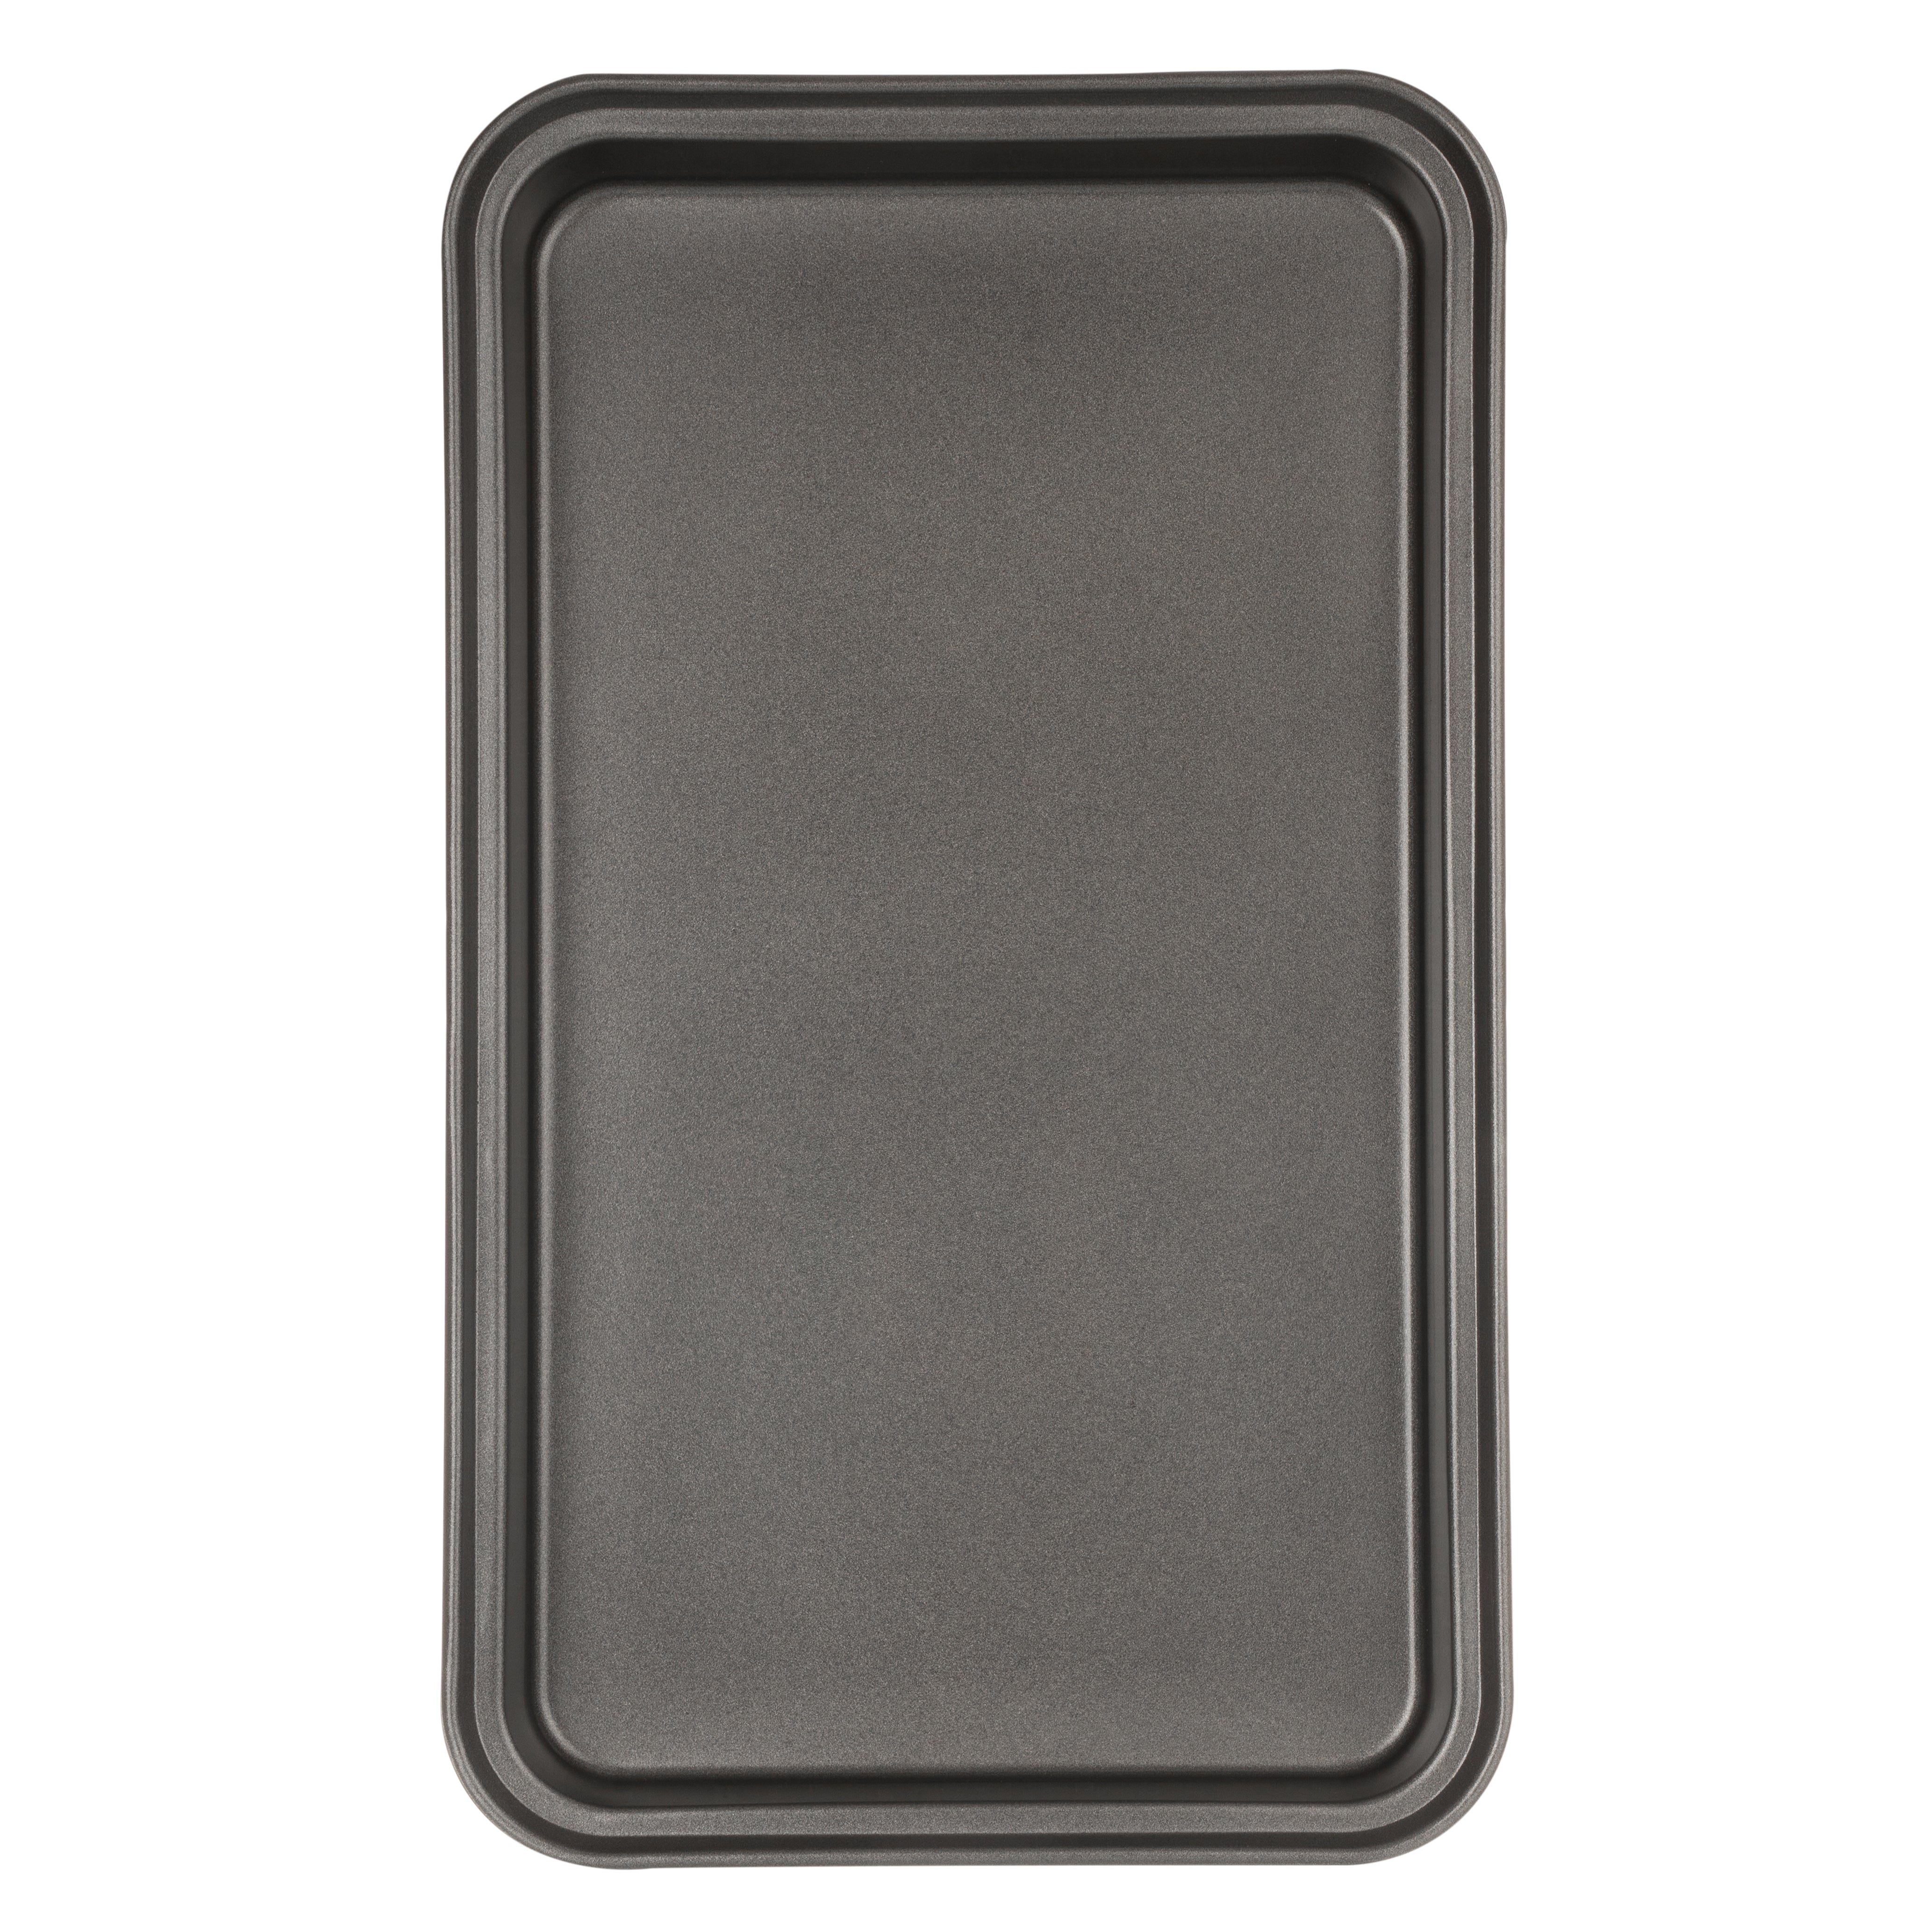 Luxe Kitchen Professional Quality Brownie Baking Cake Pan 34cm x 20cm x 3.5cm - The Cooks Cupboard Ltd